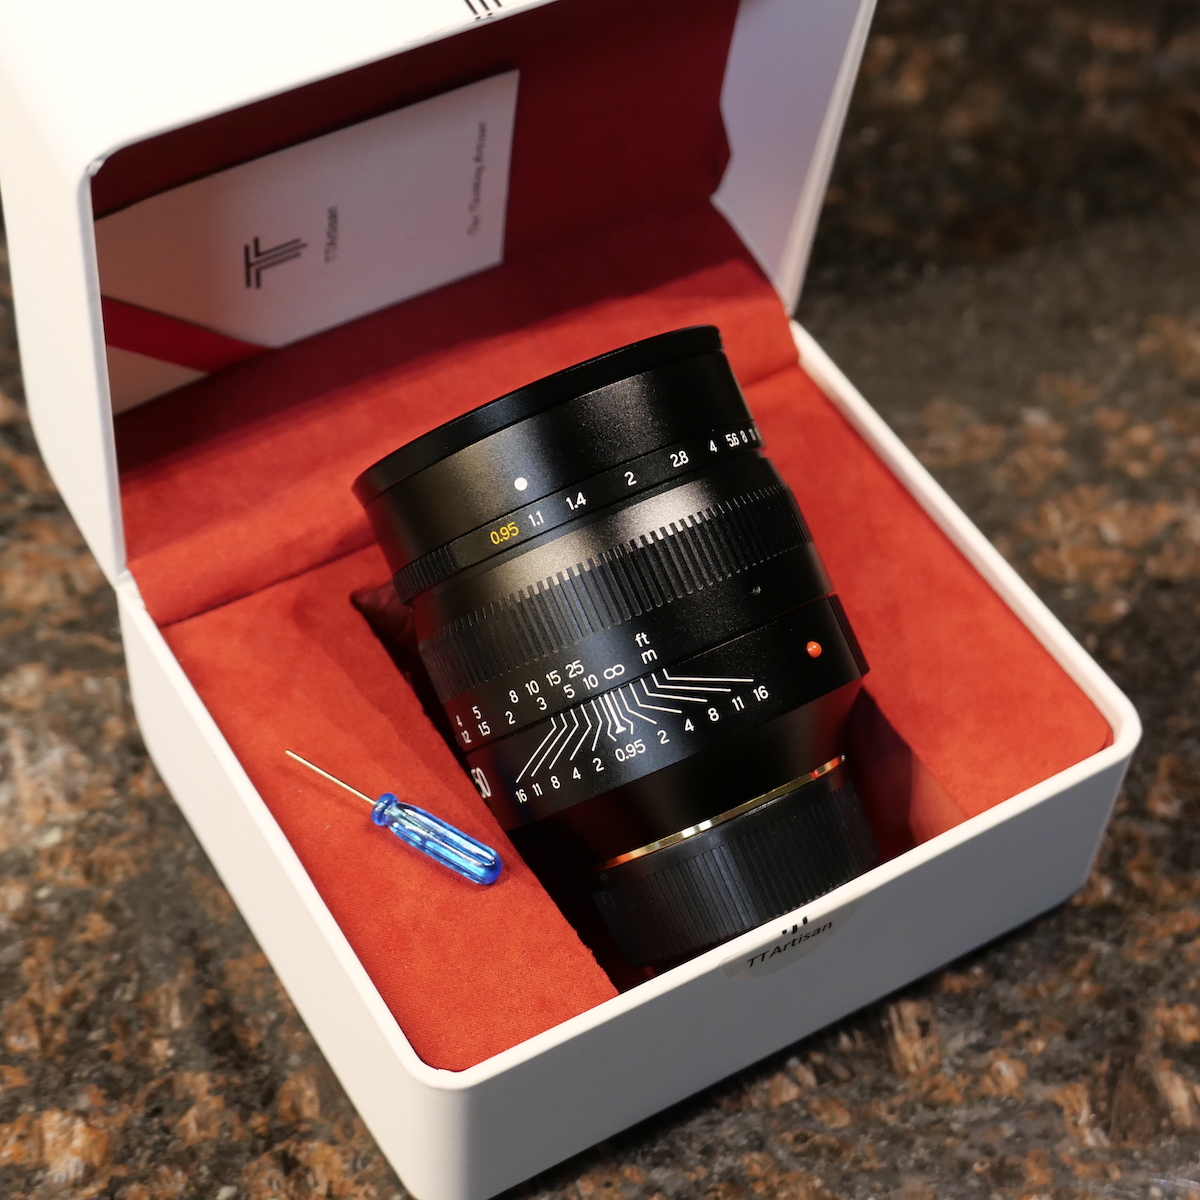 The new TTartisan 50mm f/0.95 lens is now available for pre-order